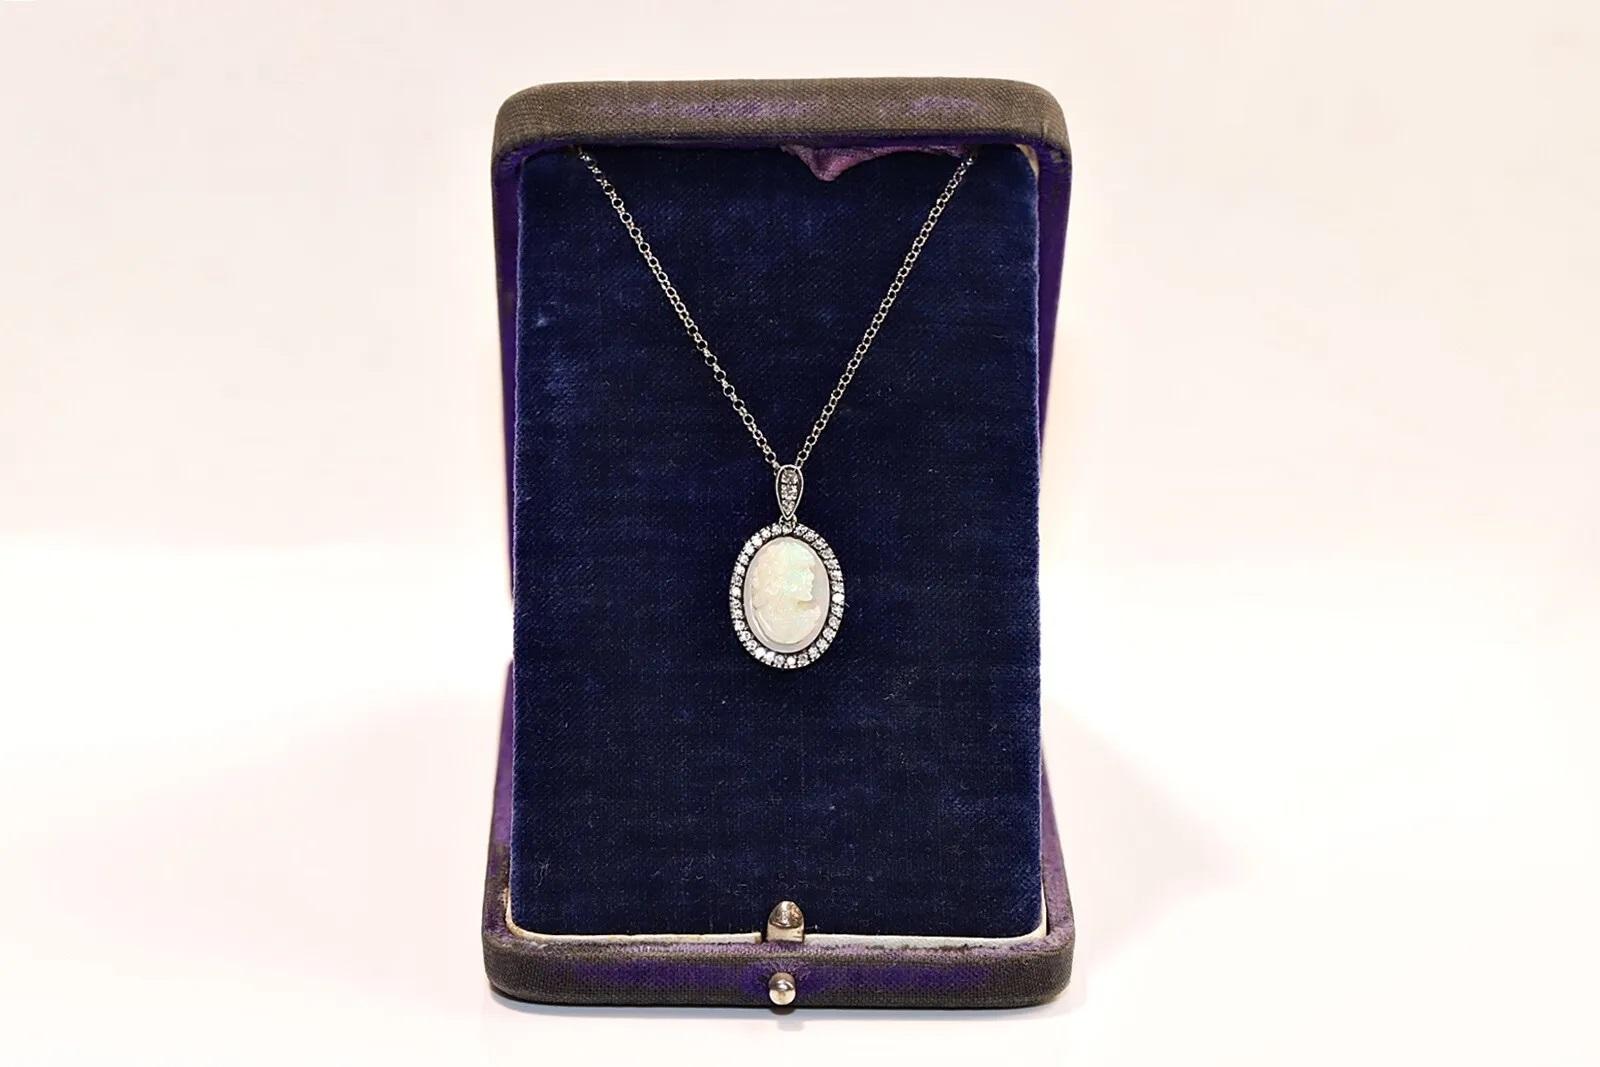 Brilliant Cut Vintage Circa 1980s 18k Gold Natural Diamond And Opal Decorated Pendant Necklace For Sale